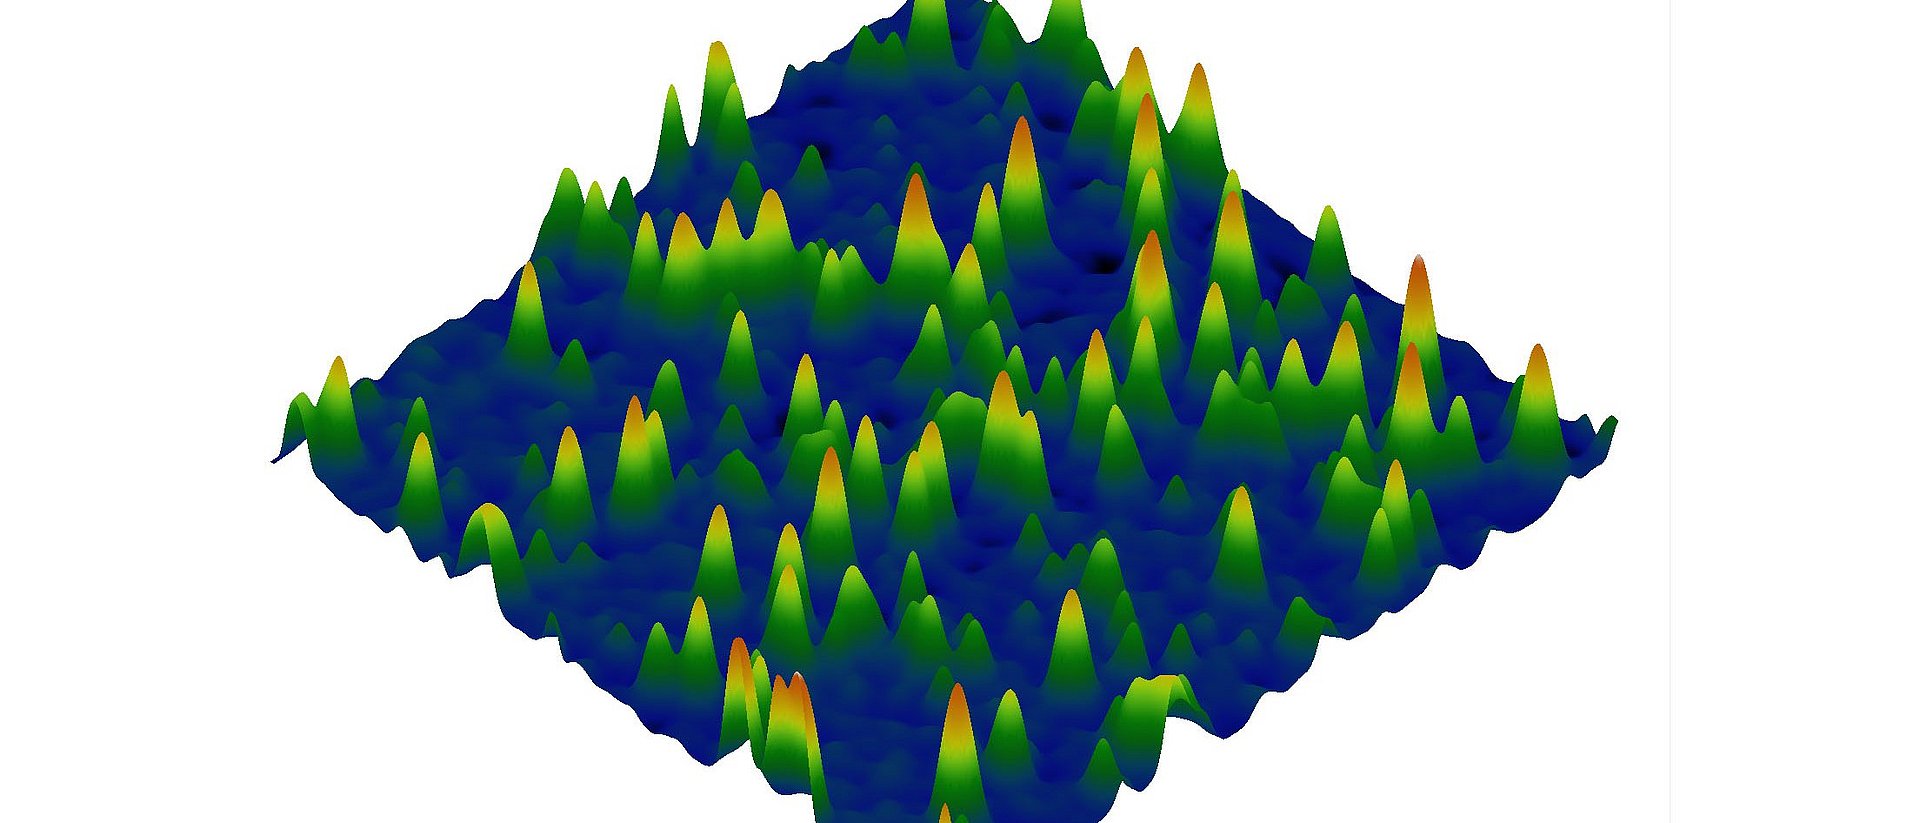 As part of her project, Dr. Barbara Lechner observes catalytic processes at atomic level. The green and orange peaks represent platinum clusters each containing 20 atoms on a flat iron oxide surface. This project, along with six others, is to receive funding from ERC Starting Grants.